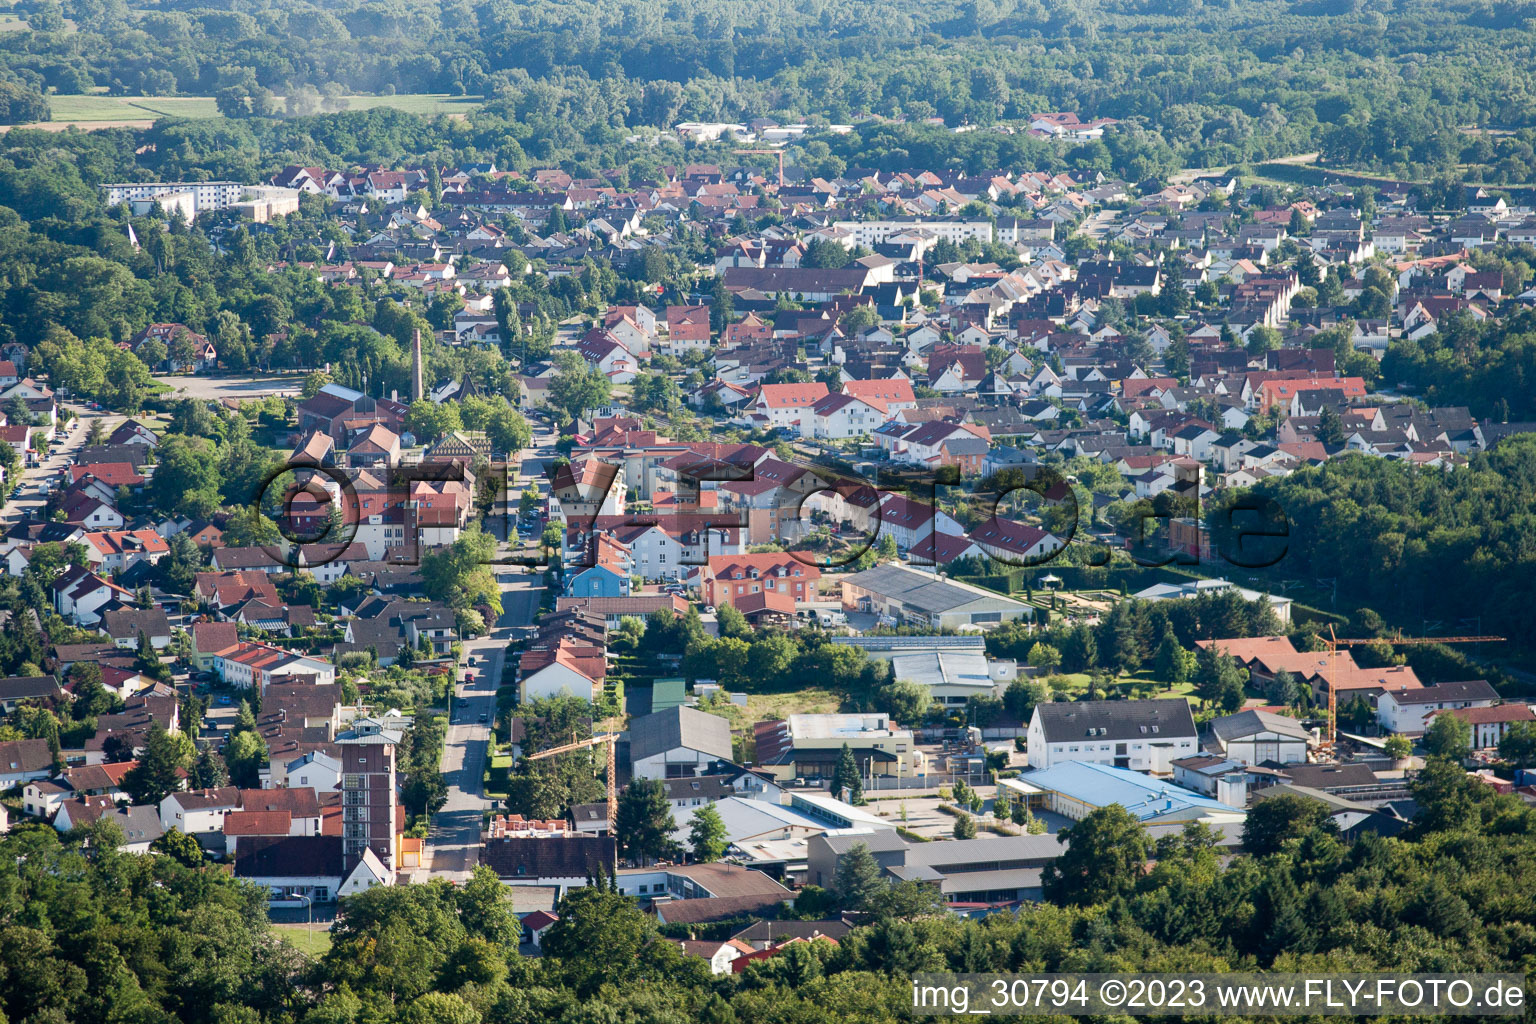 Aerial view of Lower letter st in Jockgrim in the state Rhineland-Palatinate, Germany